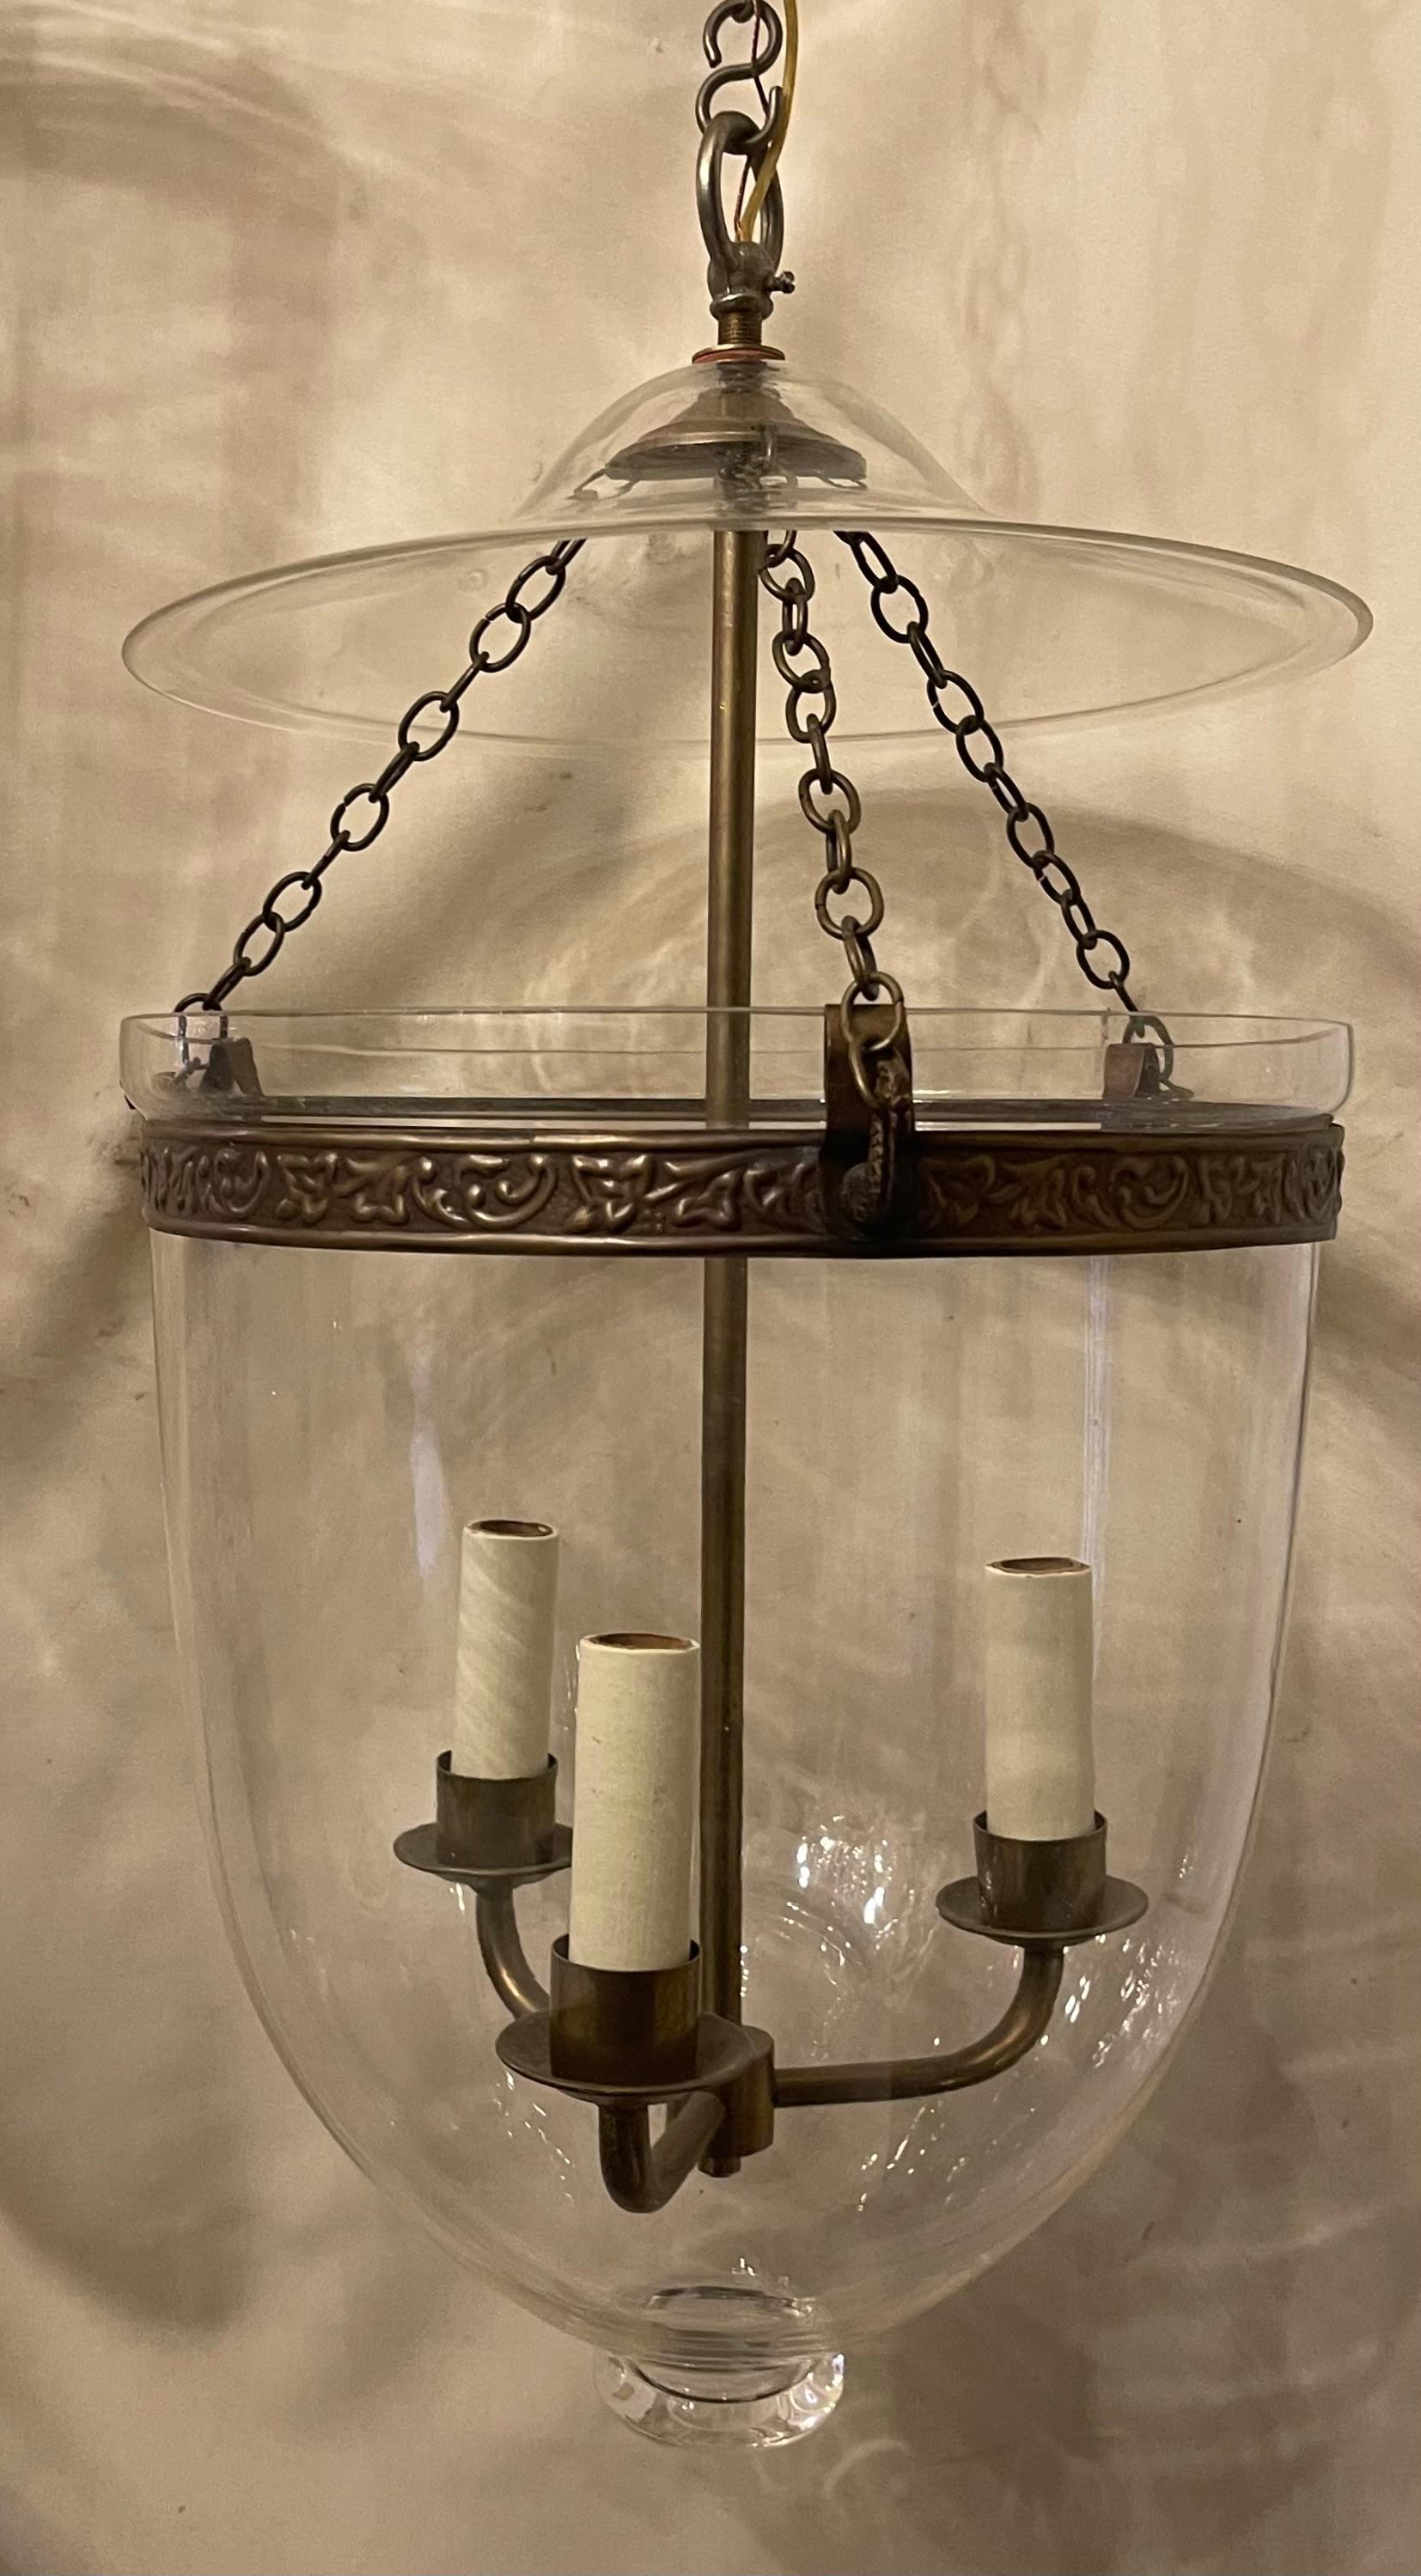 A fine English regency style brass / bronze bell jar blown glass lantern 3 candelabra light fixture by Vaughan Designs
Accompanied by chain canopy and mounting hardware

